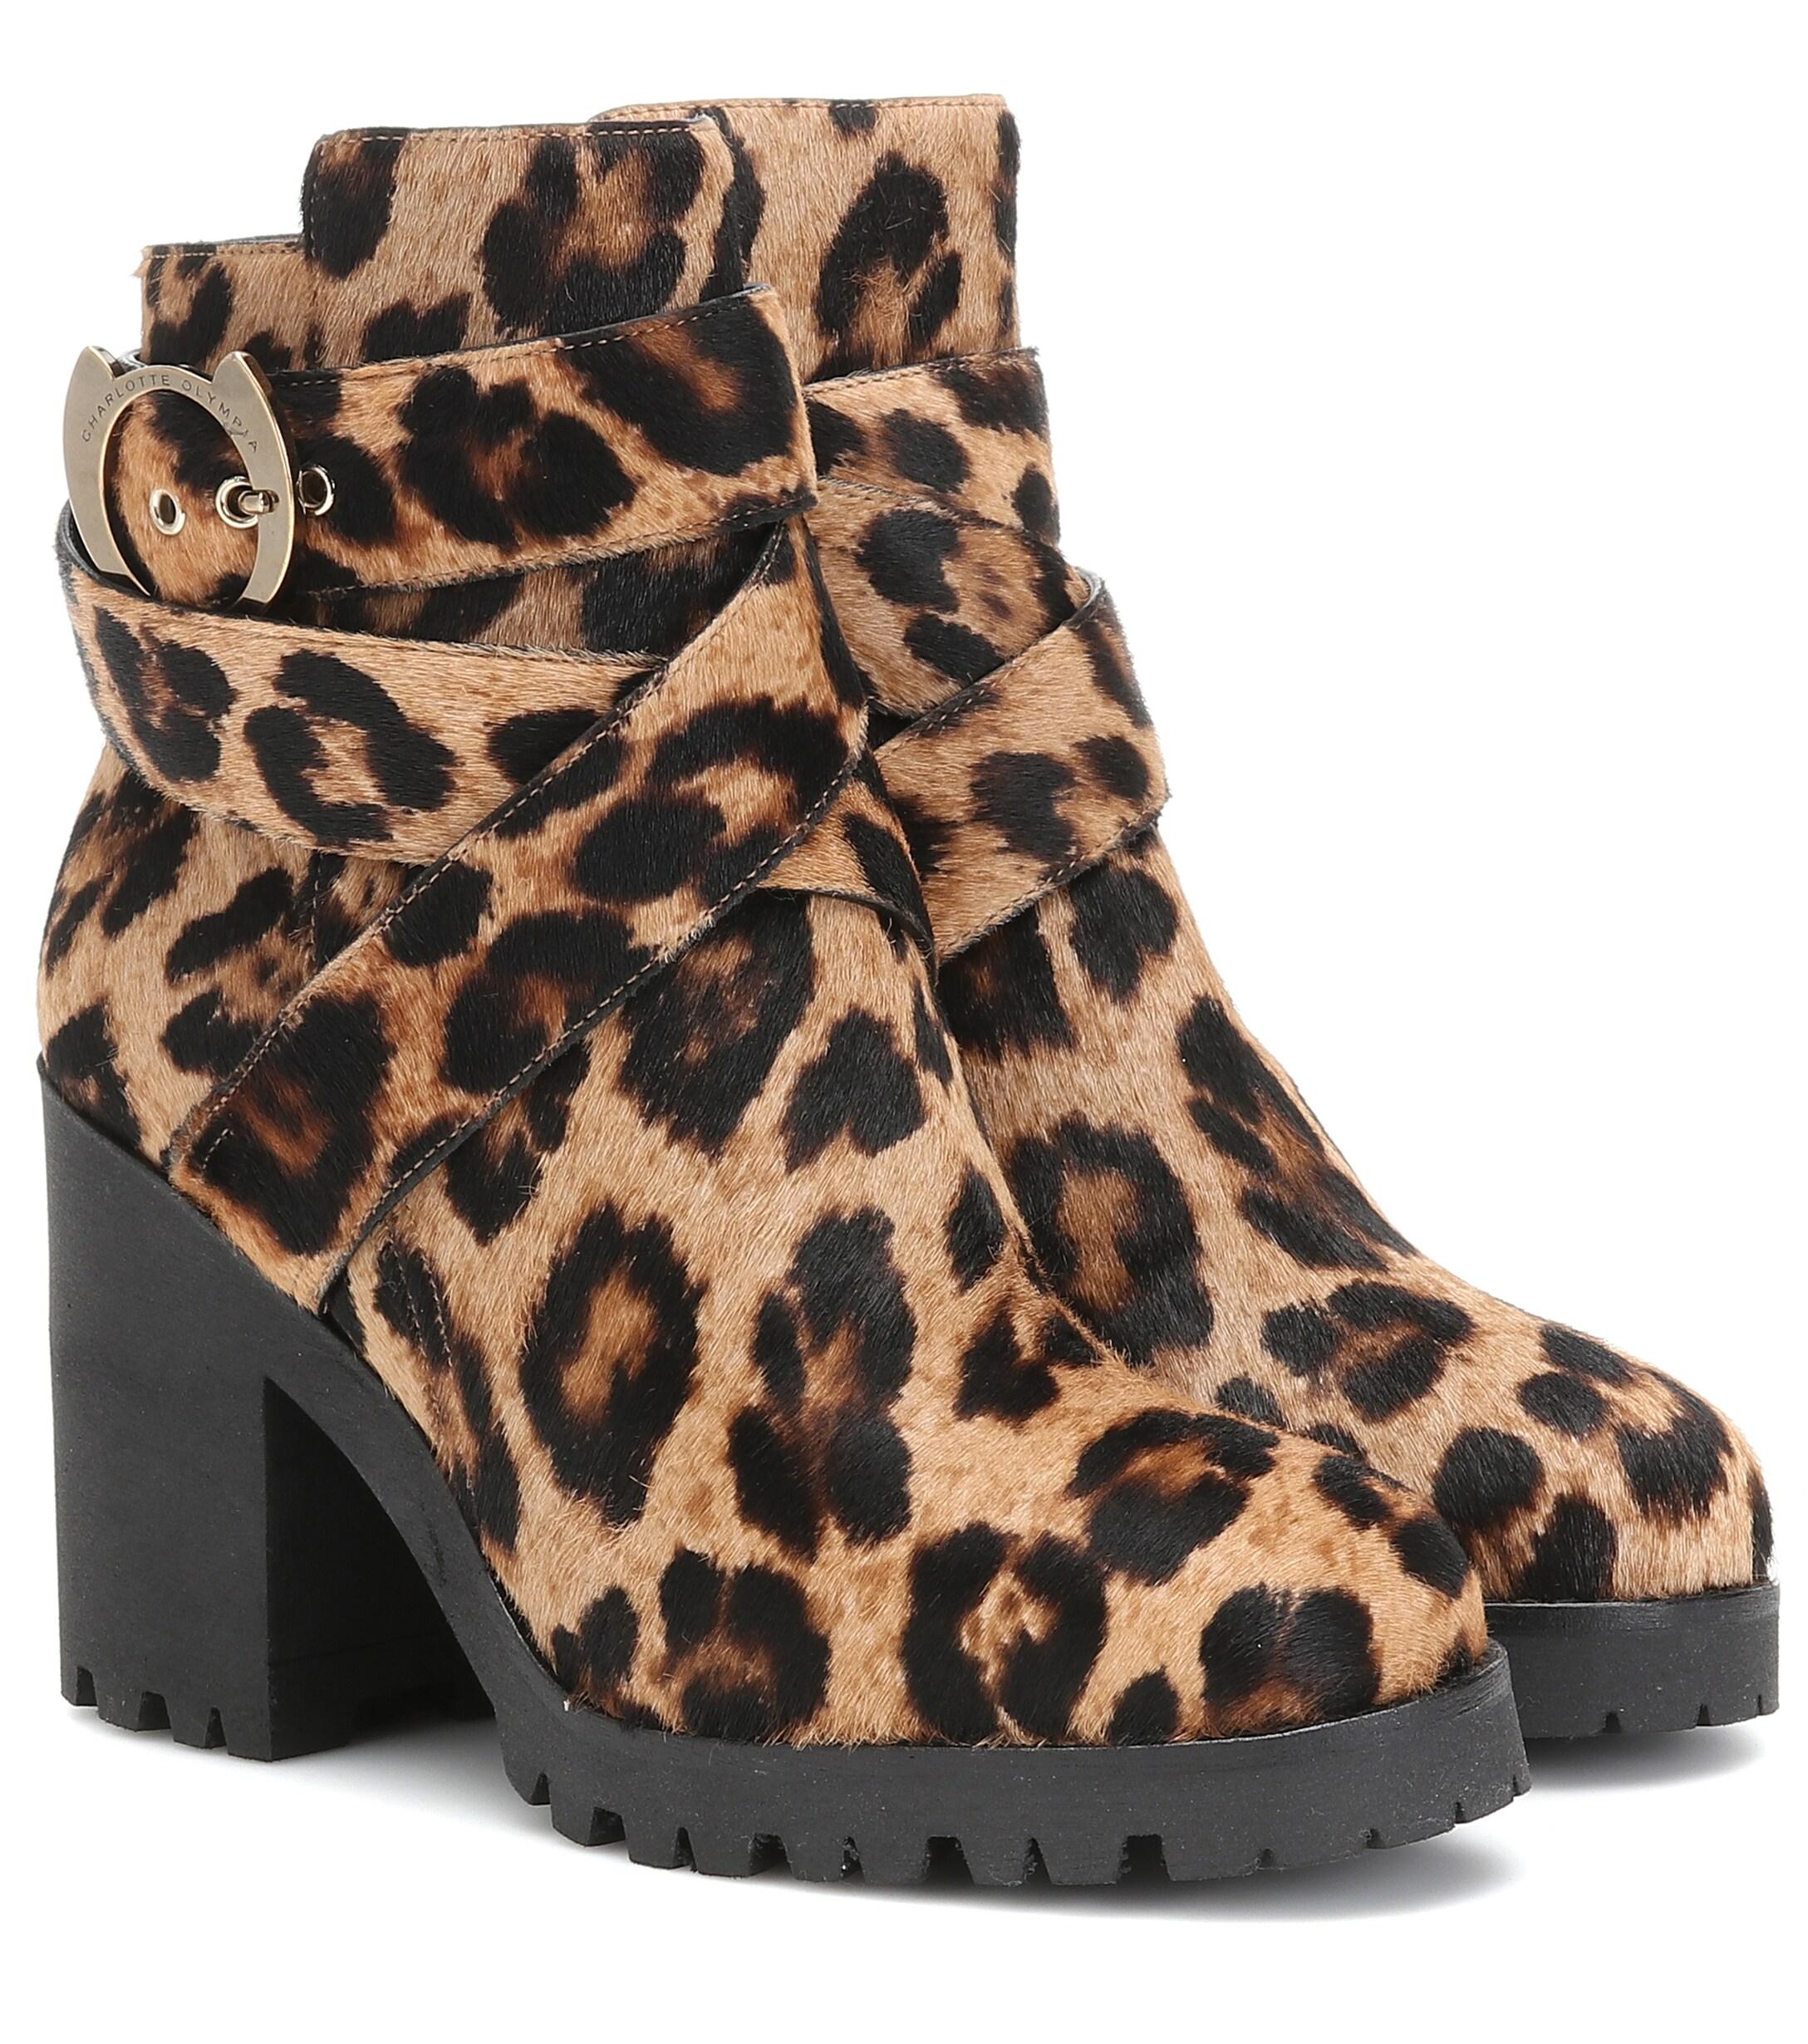 Charlotte Olympia Leopard-print Calf Hair Ankle Boots in Brown - Lyst